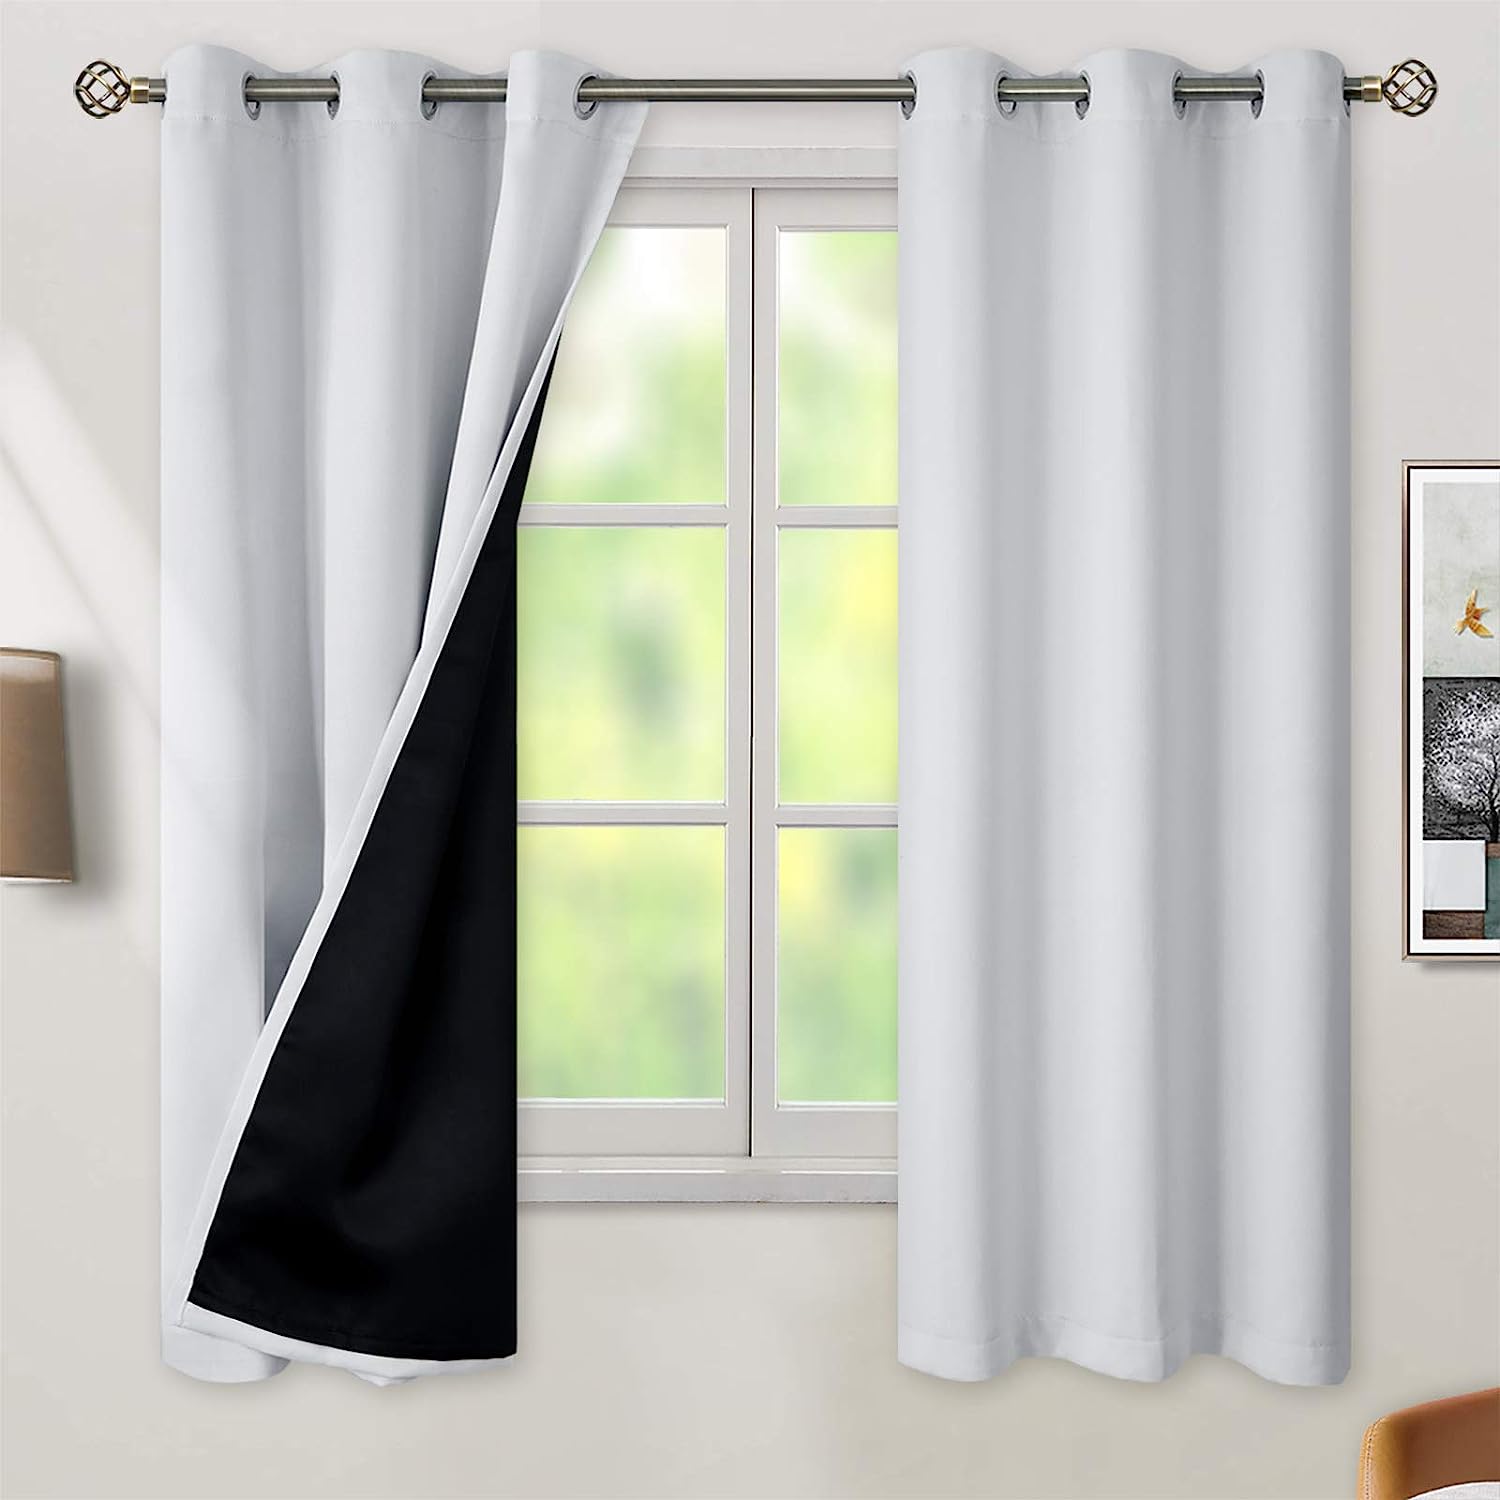 BGment Thermal Insulated 100% Blackout Curtains for [...]